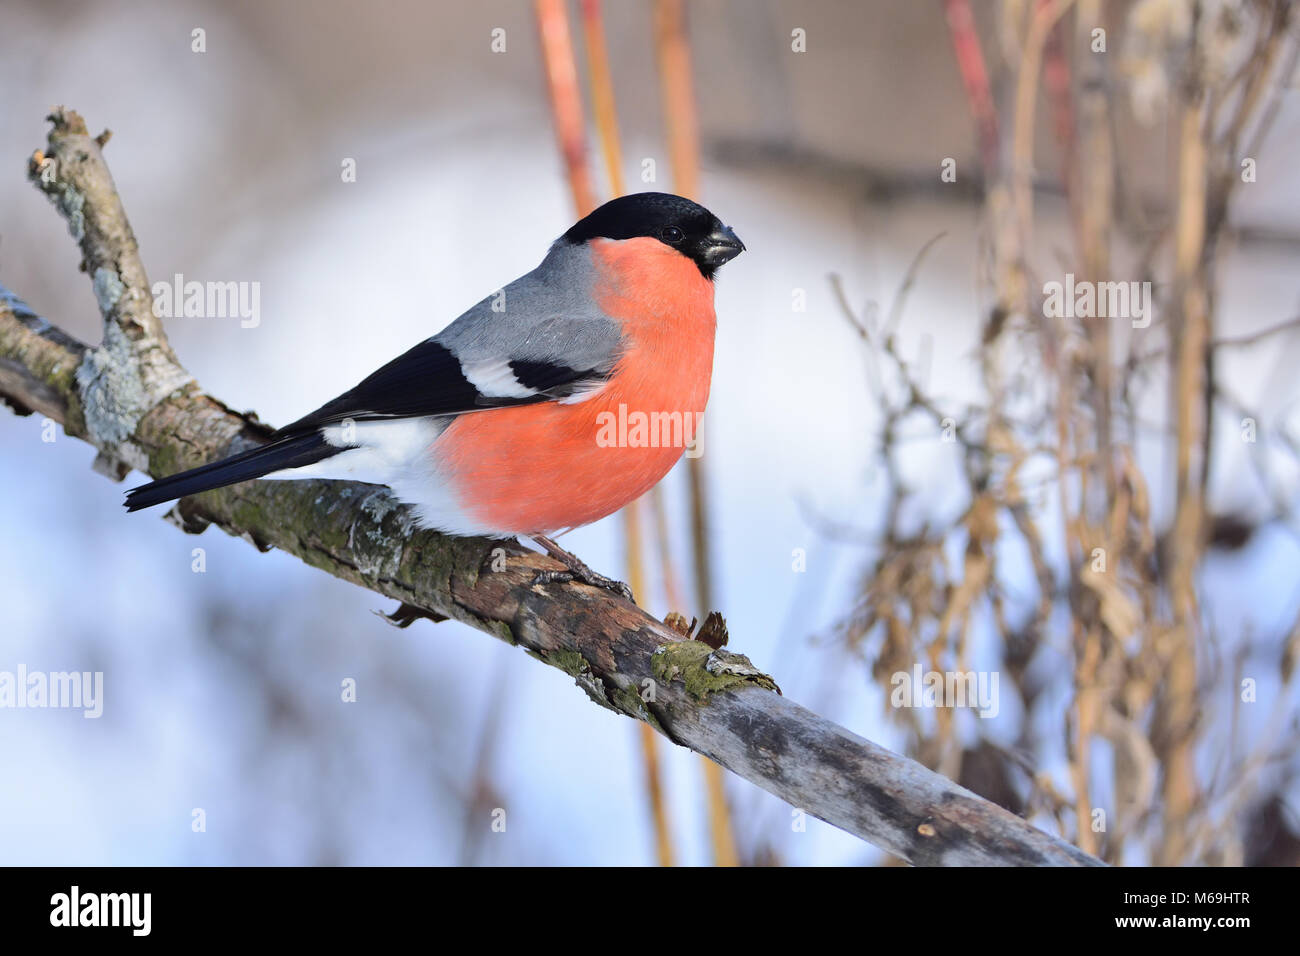 Eurasian (common) bullfinch (Pyrrhula pyrrhula) sitting on a branch with flaking bark (against the background of dry grass). Stock Photo